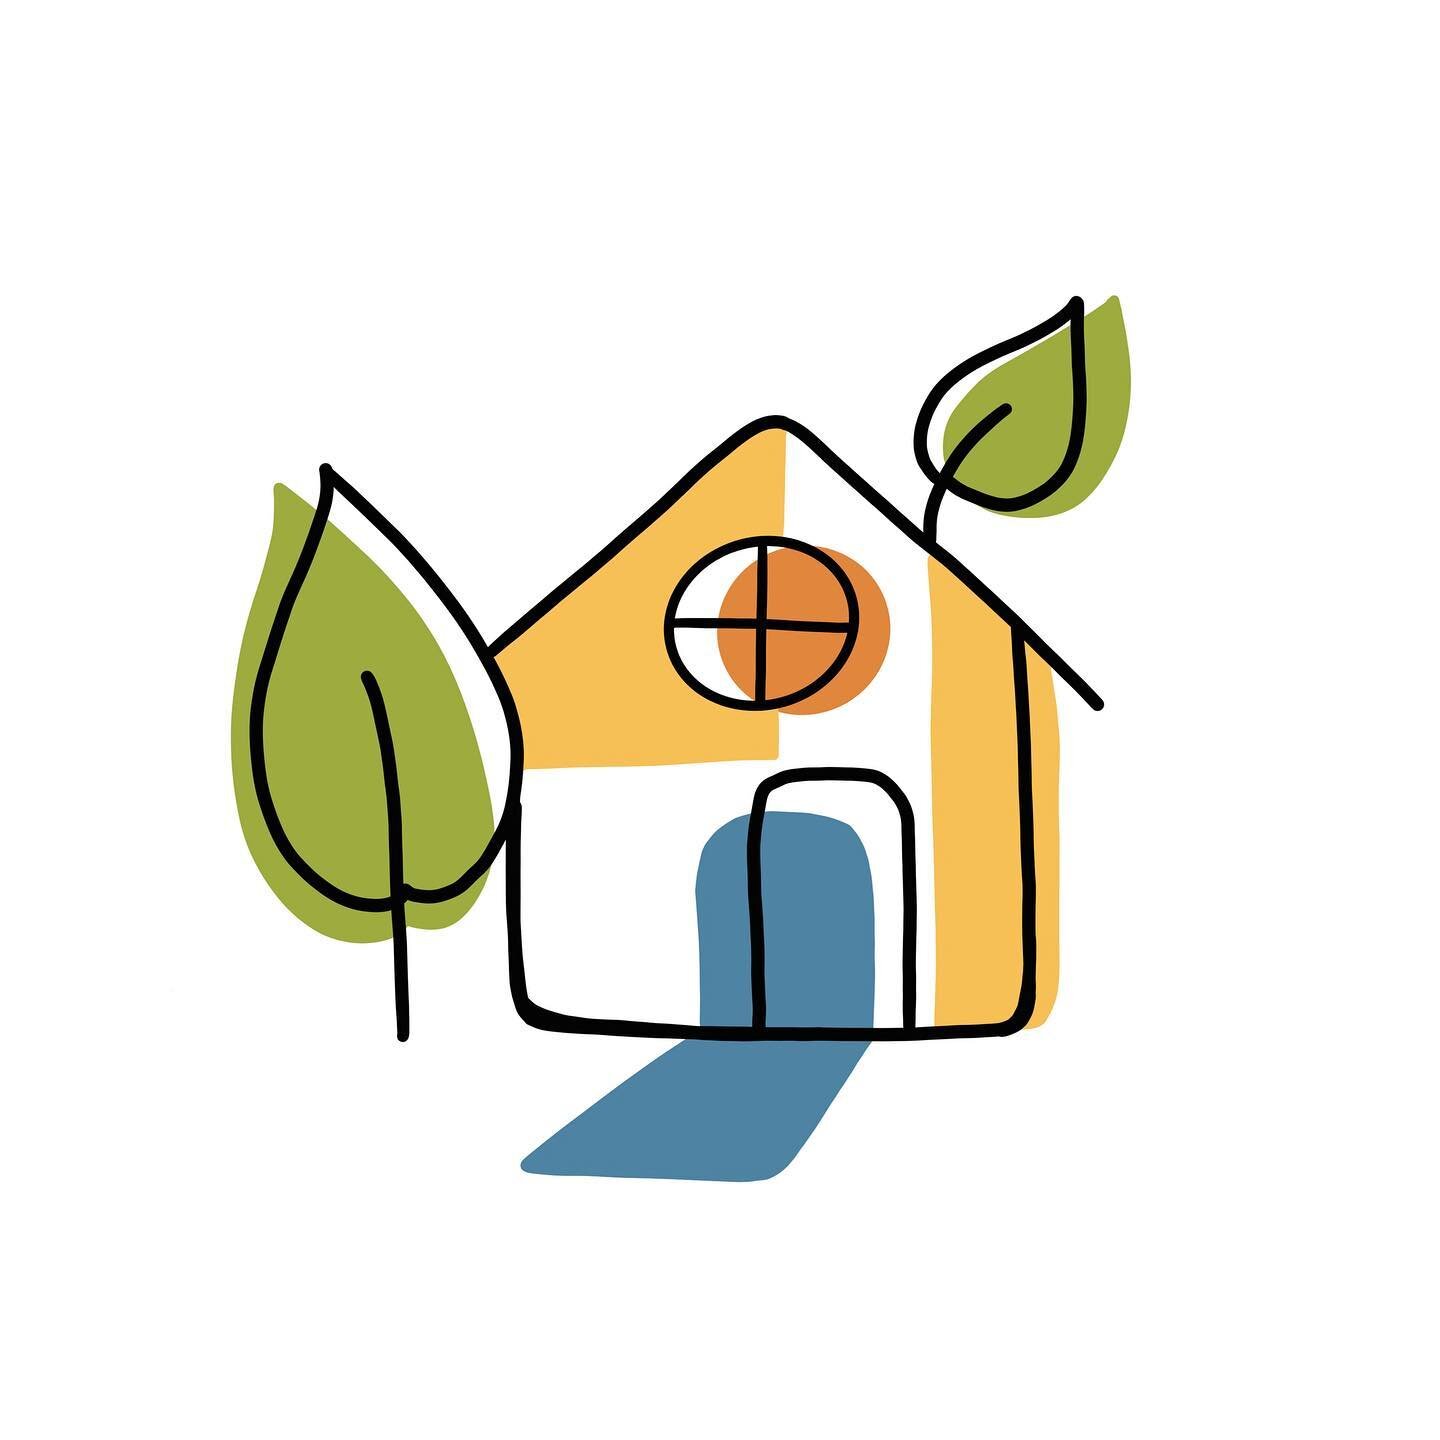 CoHo BC is here to help you find a community or housing structure that supports and nourishes you during this time and into the future. Please reach out to discuss your specific housing needs and develop a personalized strategy that works for you! ⁠
